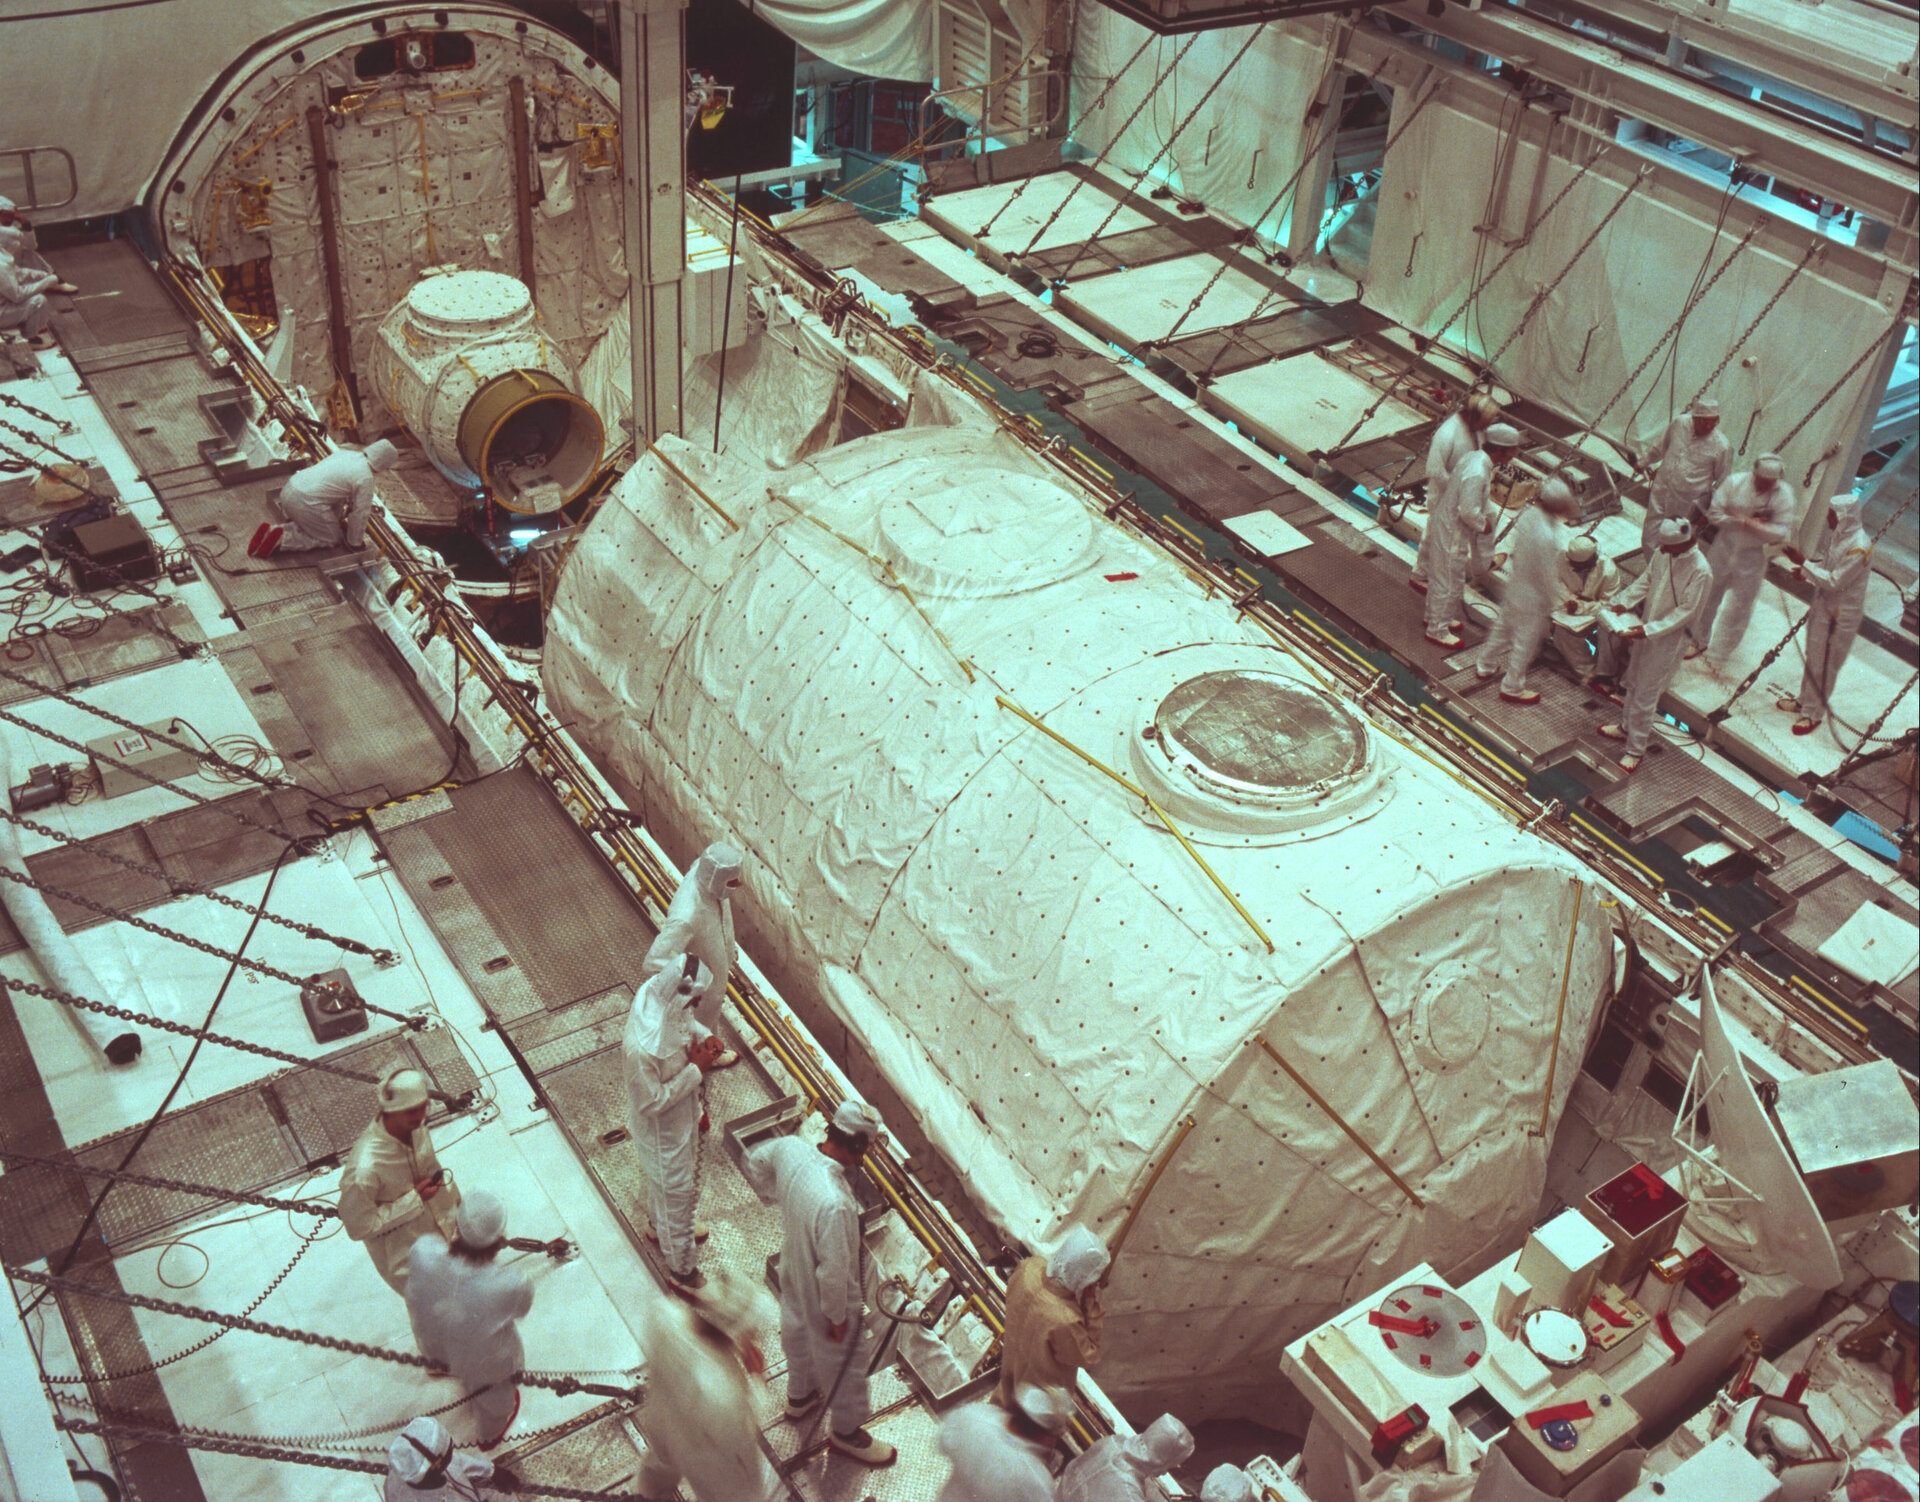 Spacelab-1 integration with Shuttle at KSC, August 1983